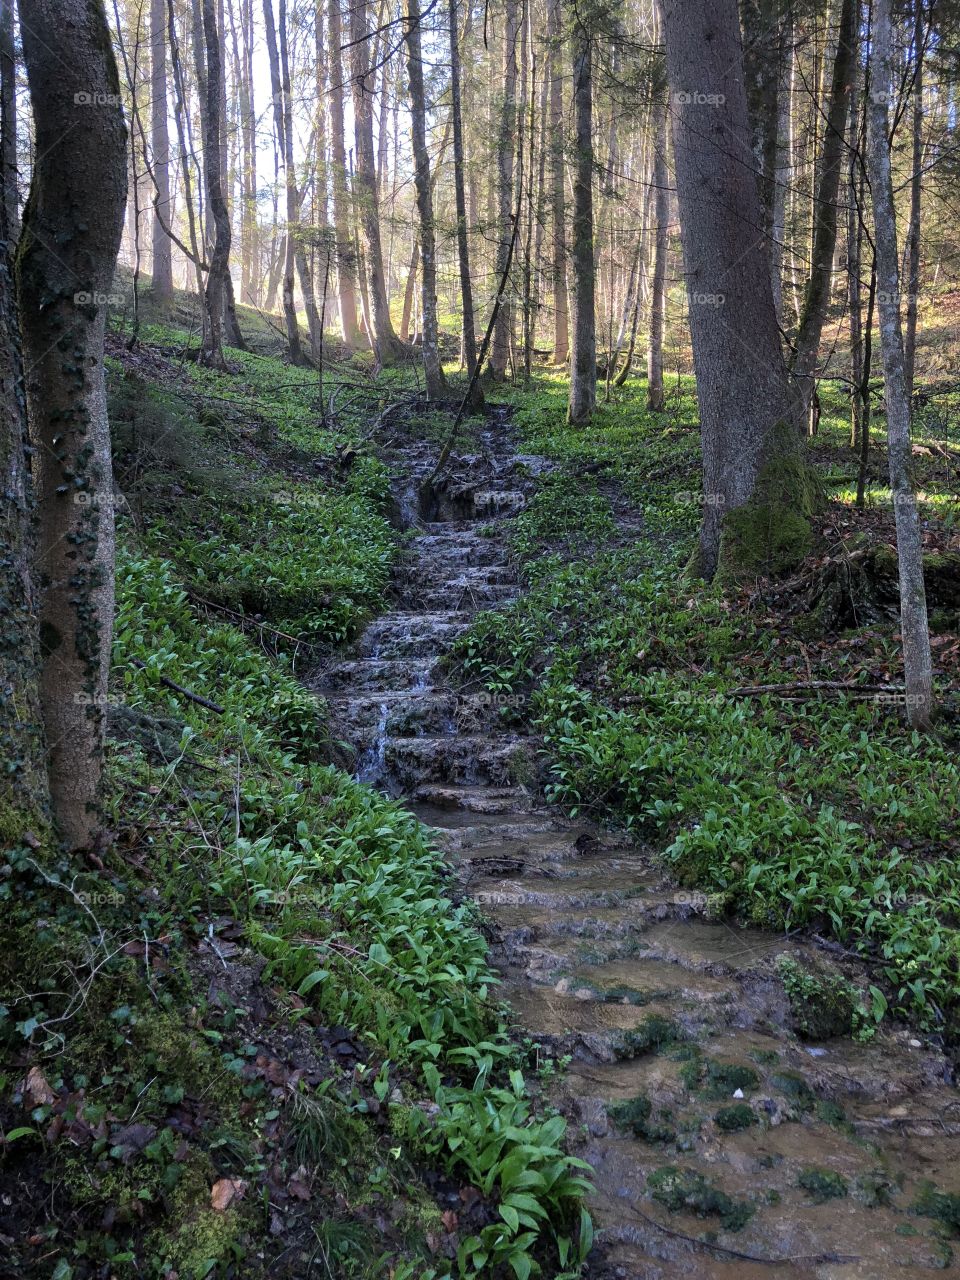 A small stream flows over a series of cascading stones, through a leafy green forest, with sunshine reflecting off of the mist in the distance.